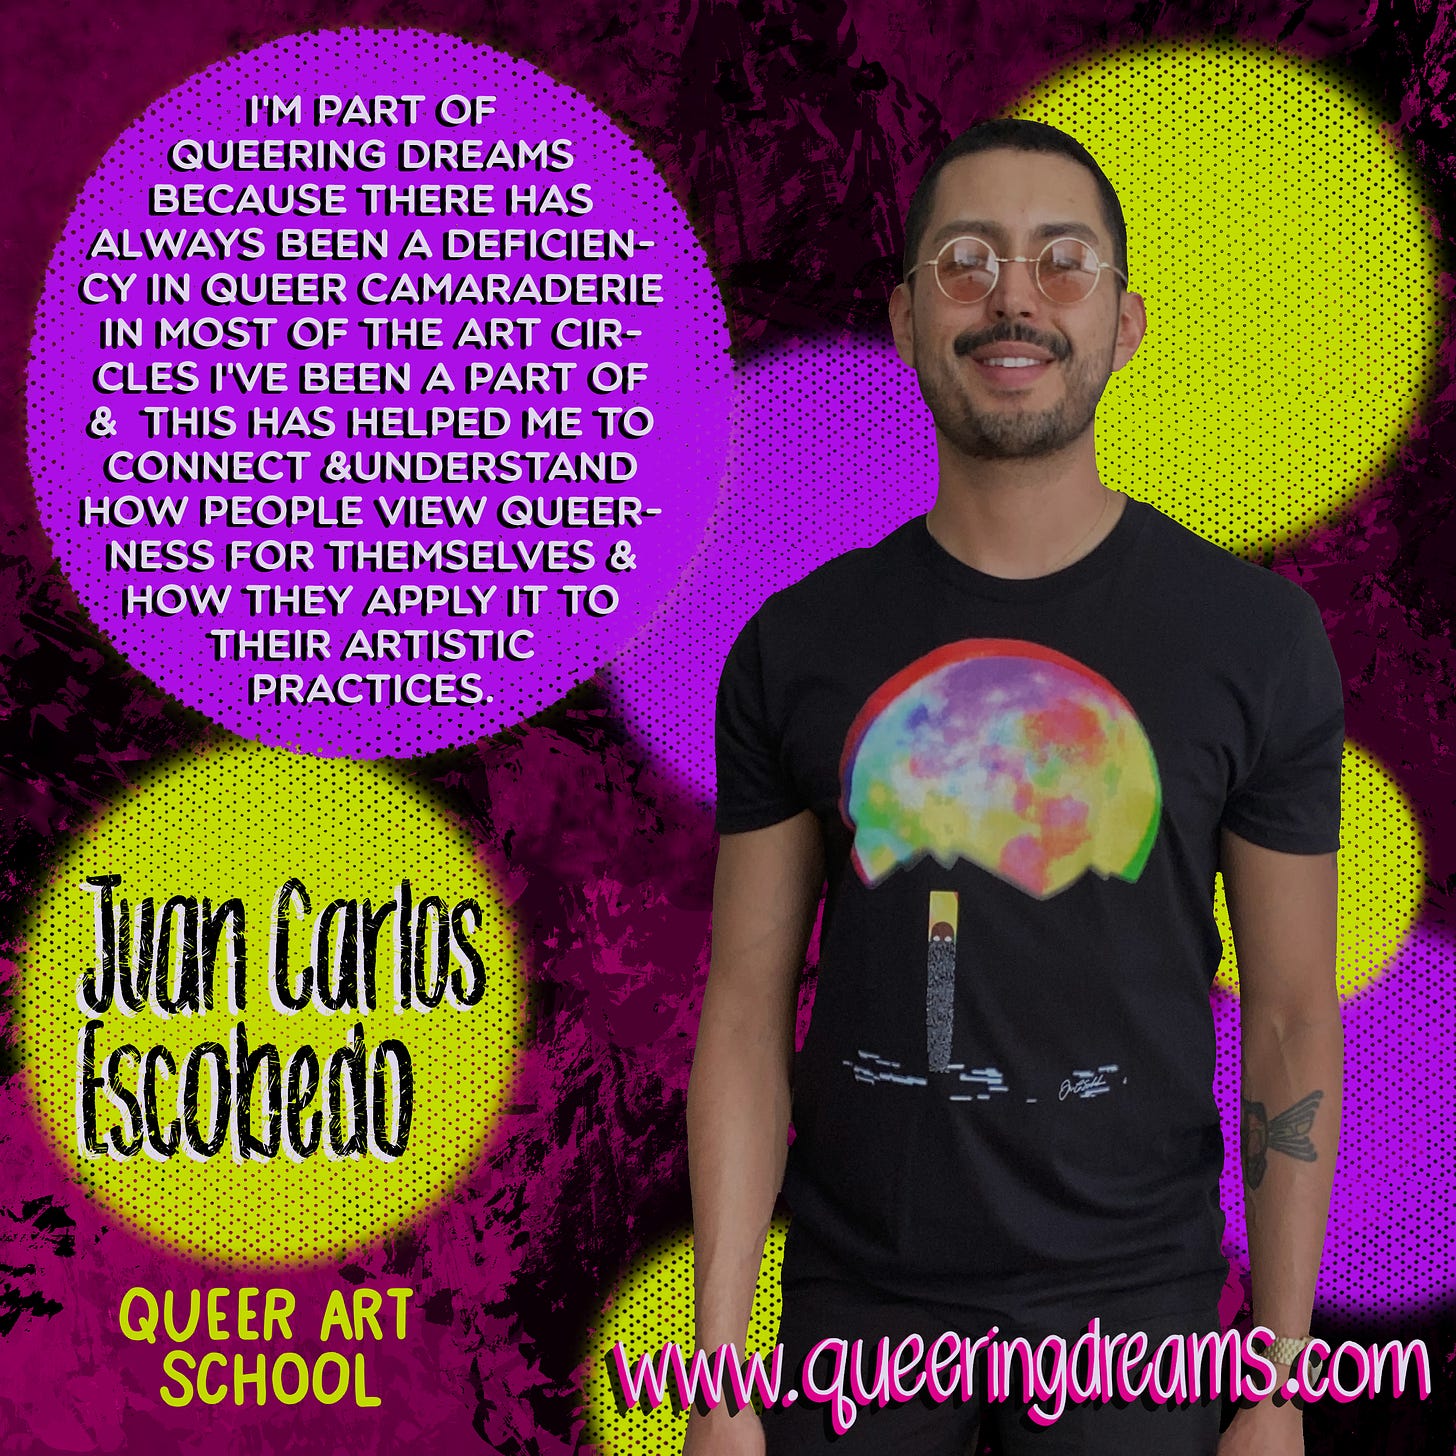 “I’m part of Queering Dreams because there has always been a deficiency in queer camaraderie in most of the art circles I’ve been a part of & this has helped me to connect & understand how people view queerness for themselves & how they apply it to their artistic practice,” in white type face against a purple dot. “Juan Carlos Escobedo,” in black hand lettering set against a yellow dot. Juan Carlos is a brown, Mexican-American queer male artist, is smiling & looking into the camera, and is wearing the The Moon tee. www.queeringdreams.com. All set against a pink with black splotchy paint background.